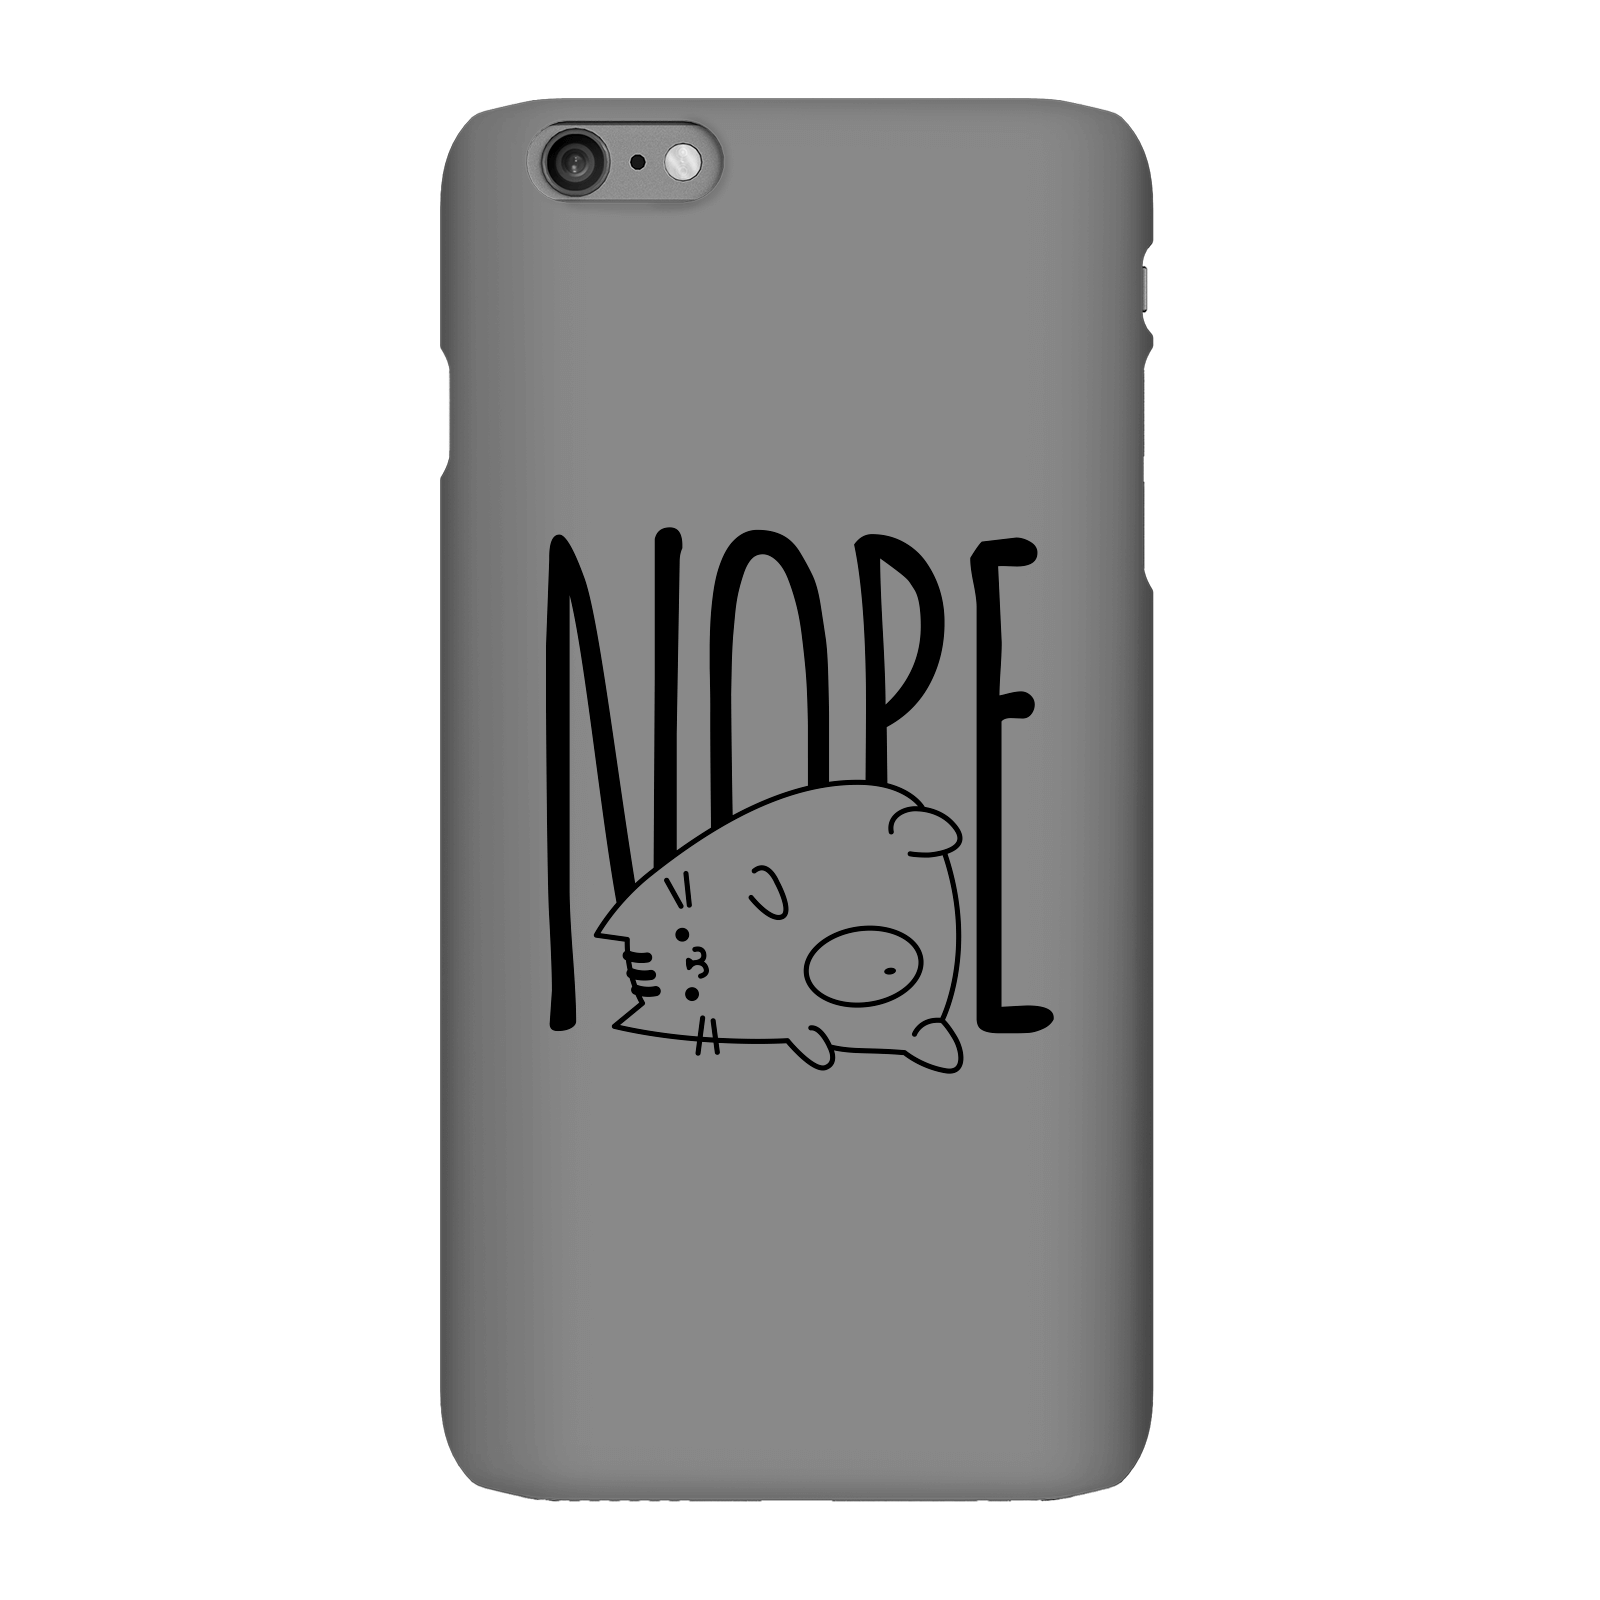 Nope Phone Case for iPhone and Android - iPhone 6 Plus - Snap Case - Matte